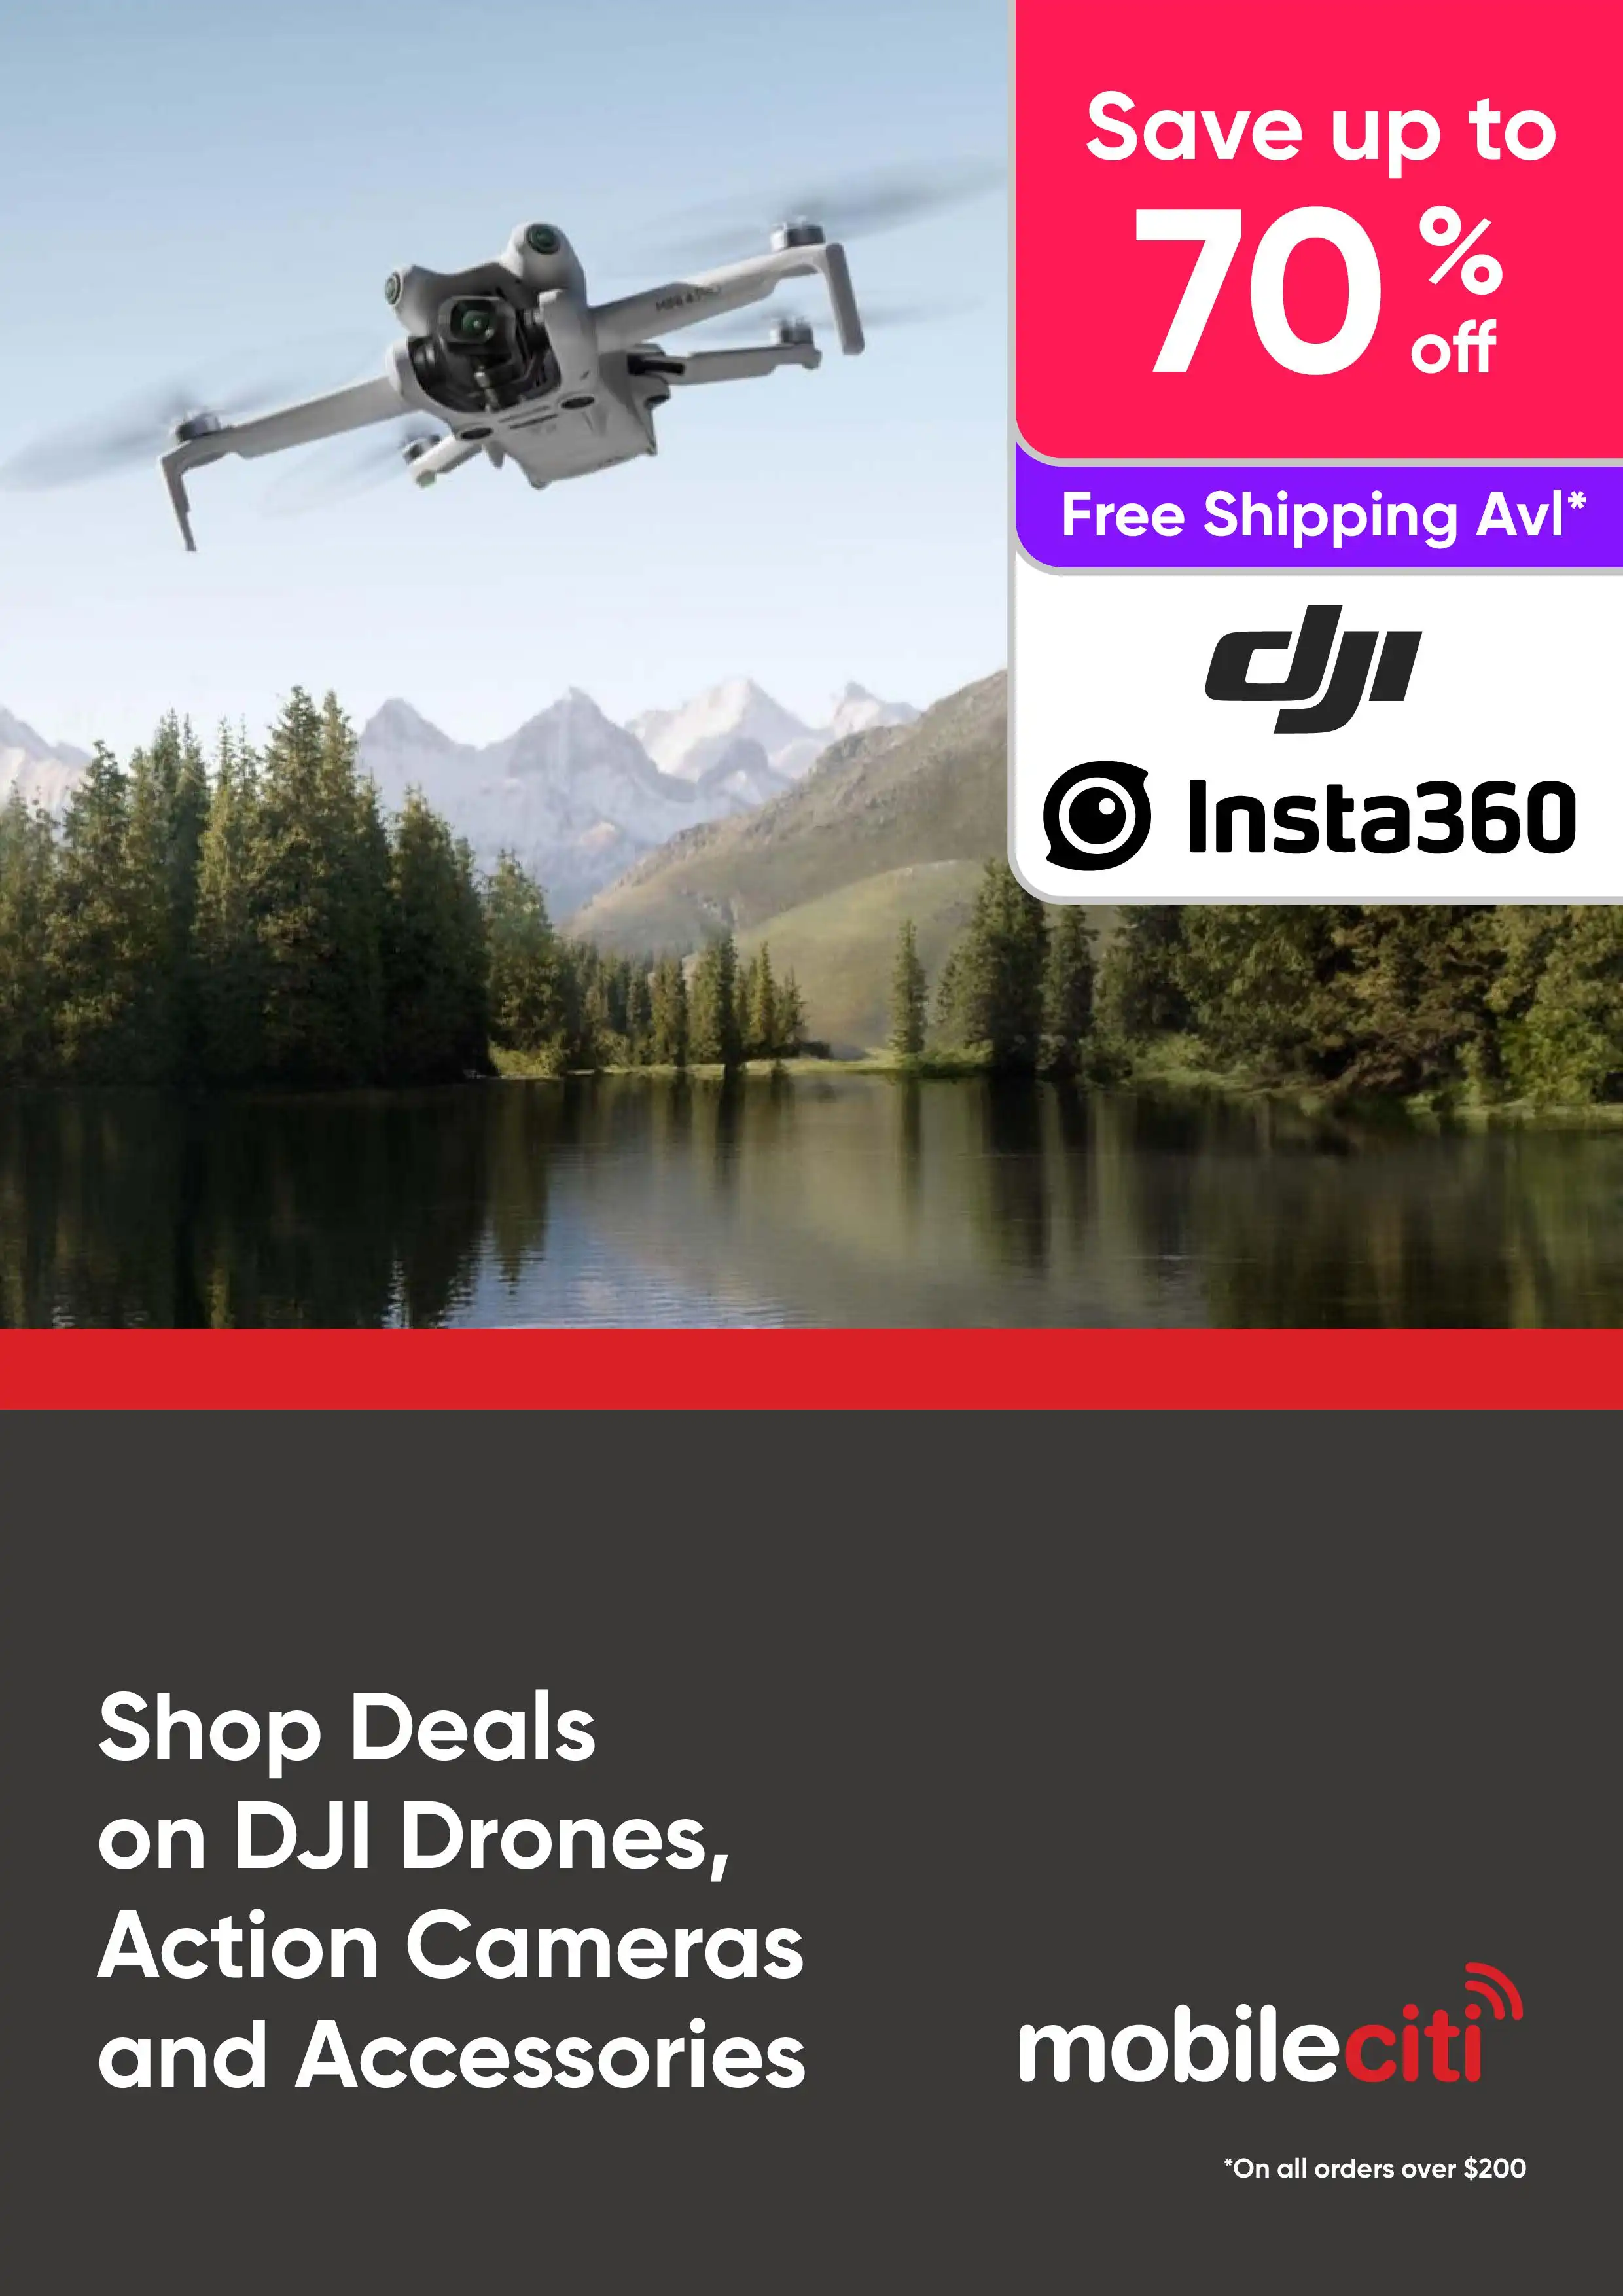 Shop Deals on DJI Drones, Action Cameras and Accessories - Save Up to 70% Off